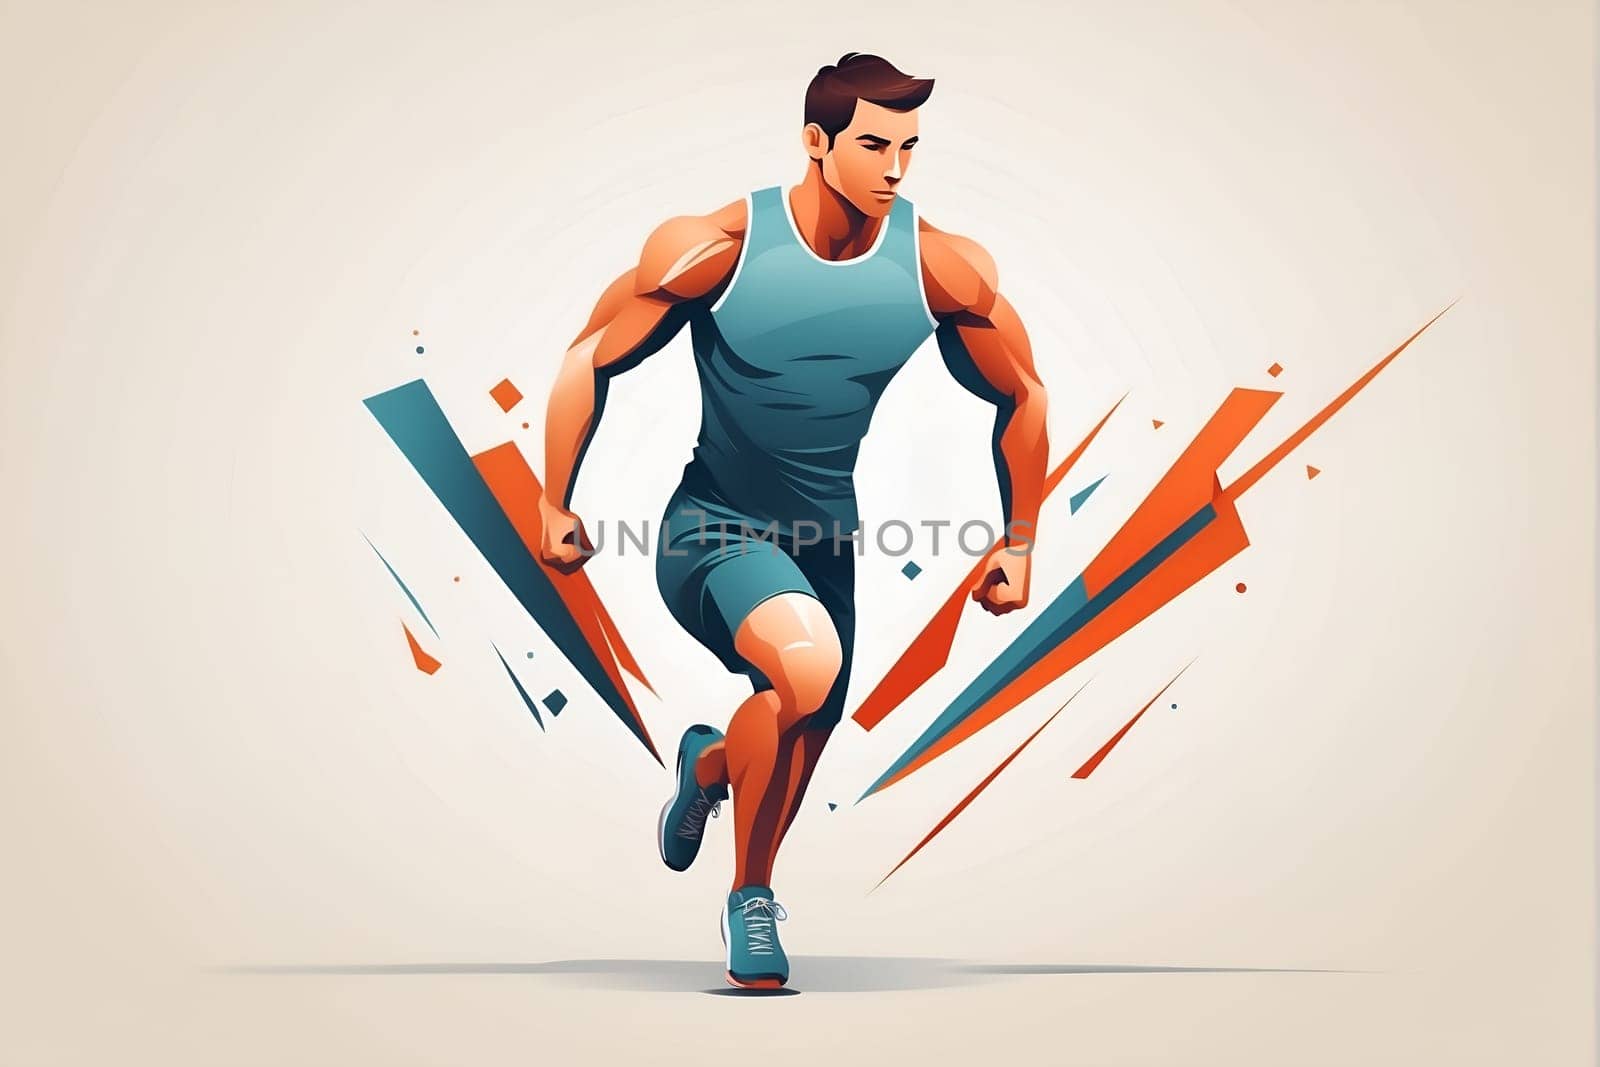 A determined man showing speed and strength as he sprints energetically against a white background.